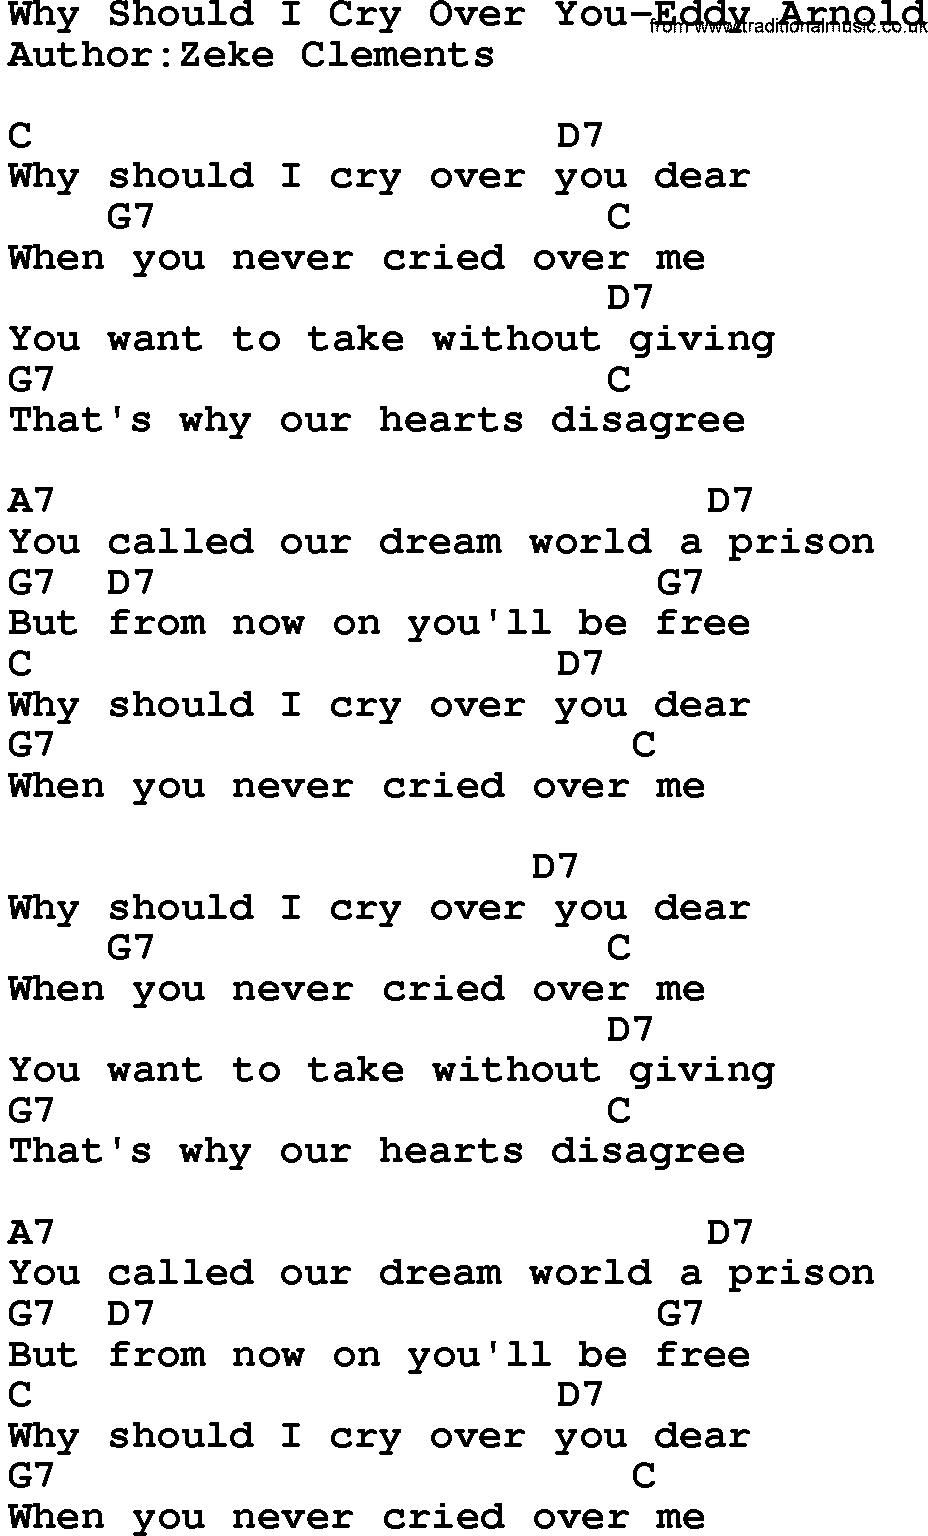 Country music song: Why Should I Cry Over You-Eddy Arnold lyrics and chords